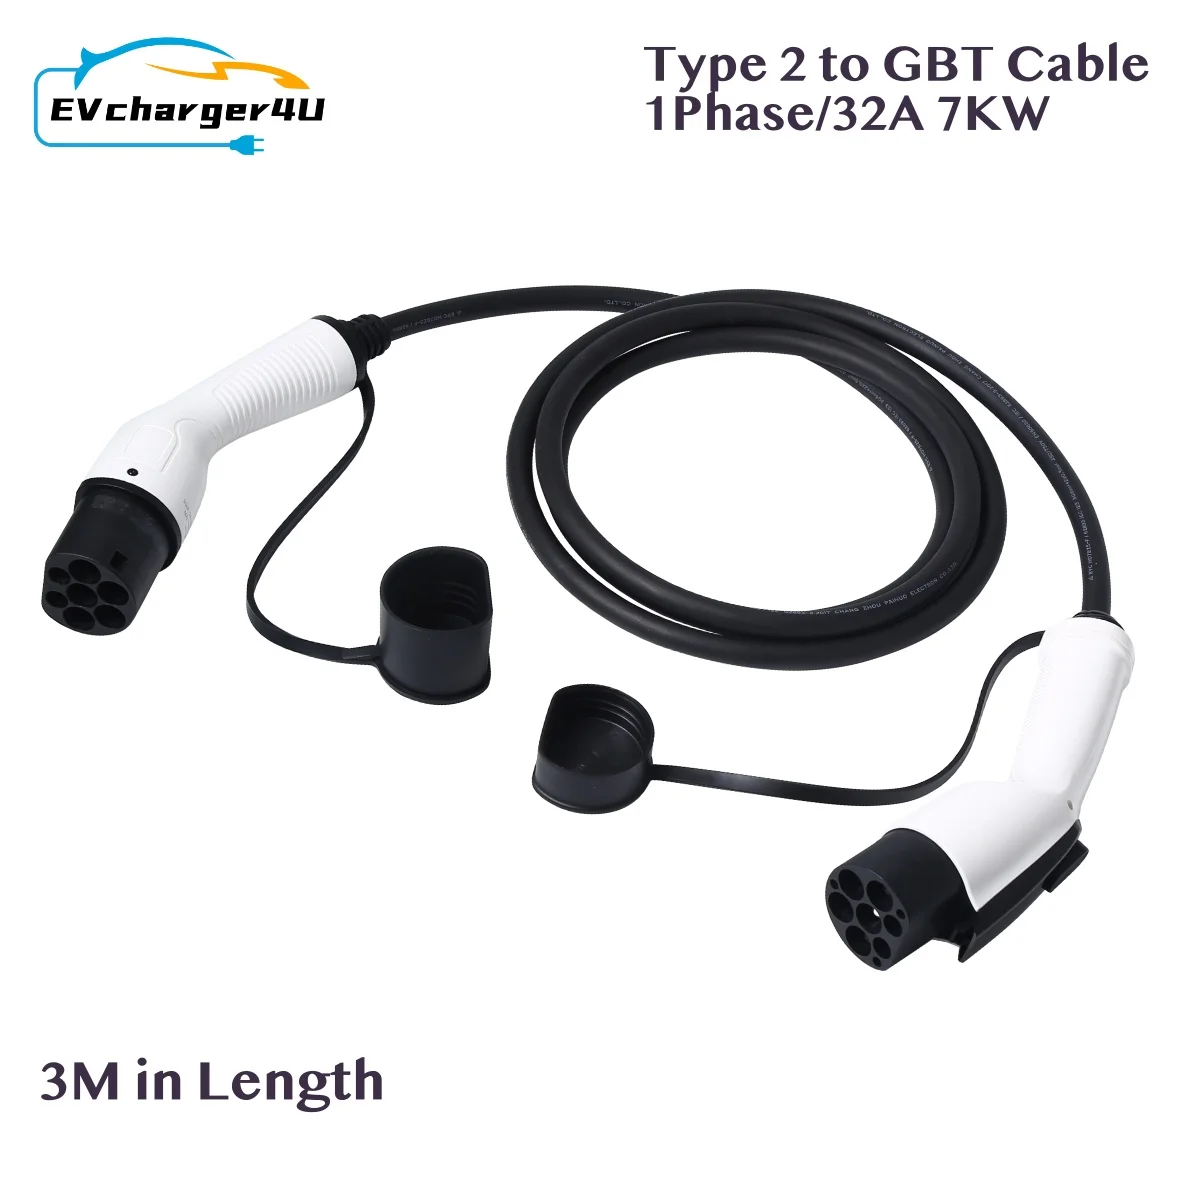 

EVcharger4U Type2 to GBT EV Charging Cable 1Phase 32A 7KW 3M Electric Vehicle Type 2 Cord GB/T for Charger Station